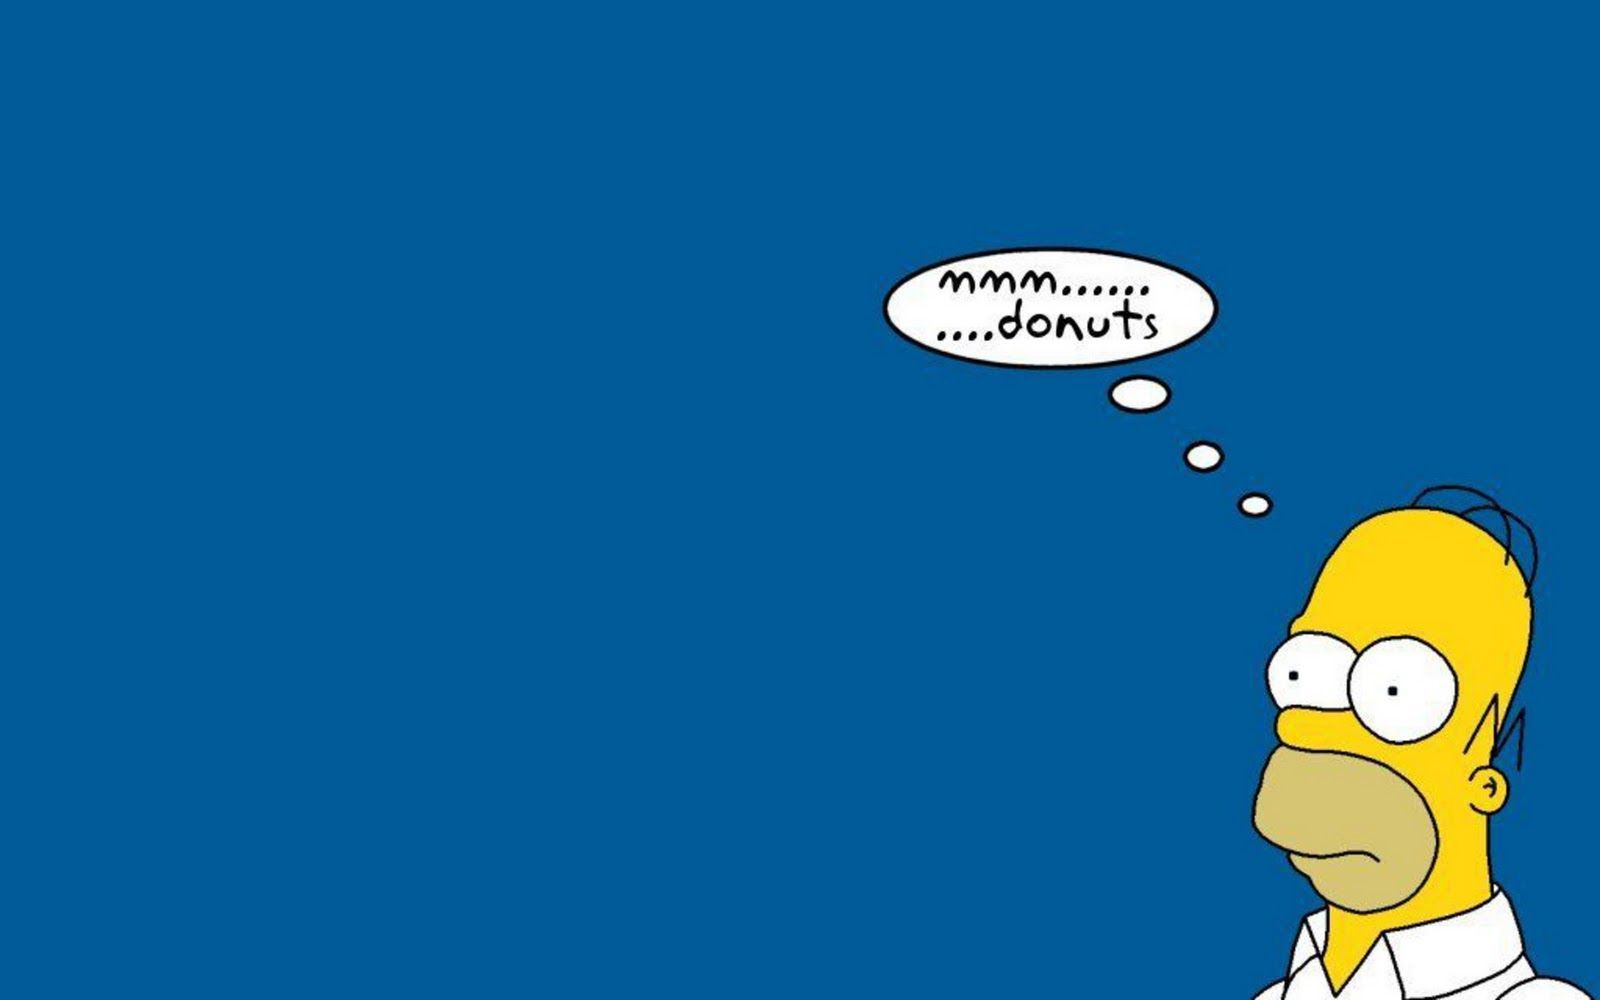 The Simpsons Wallpapers HD - Wallpaper Cave